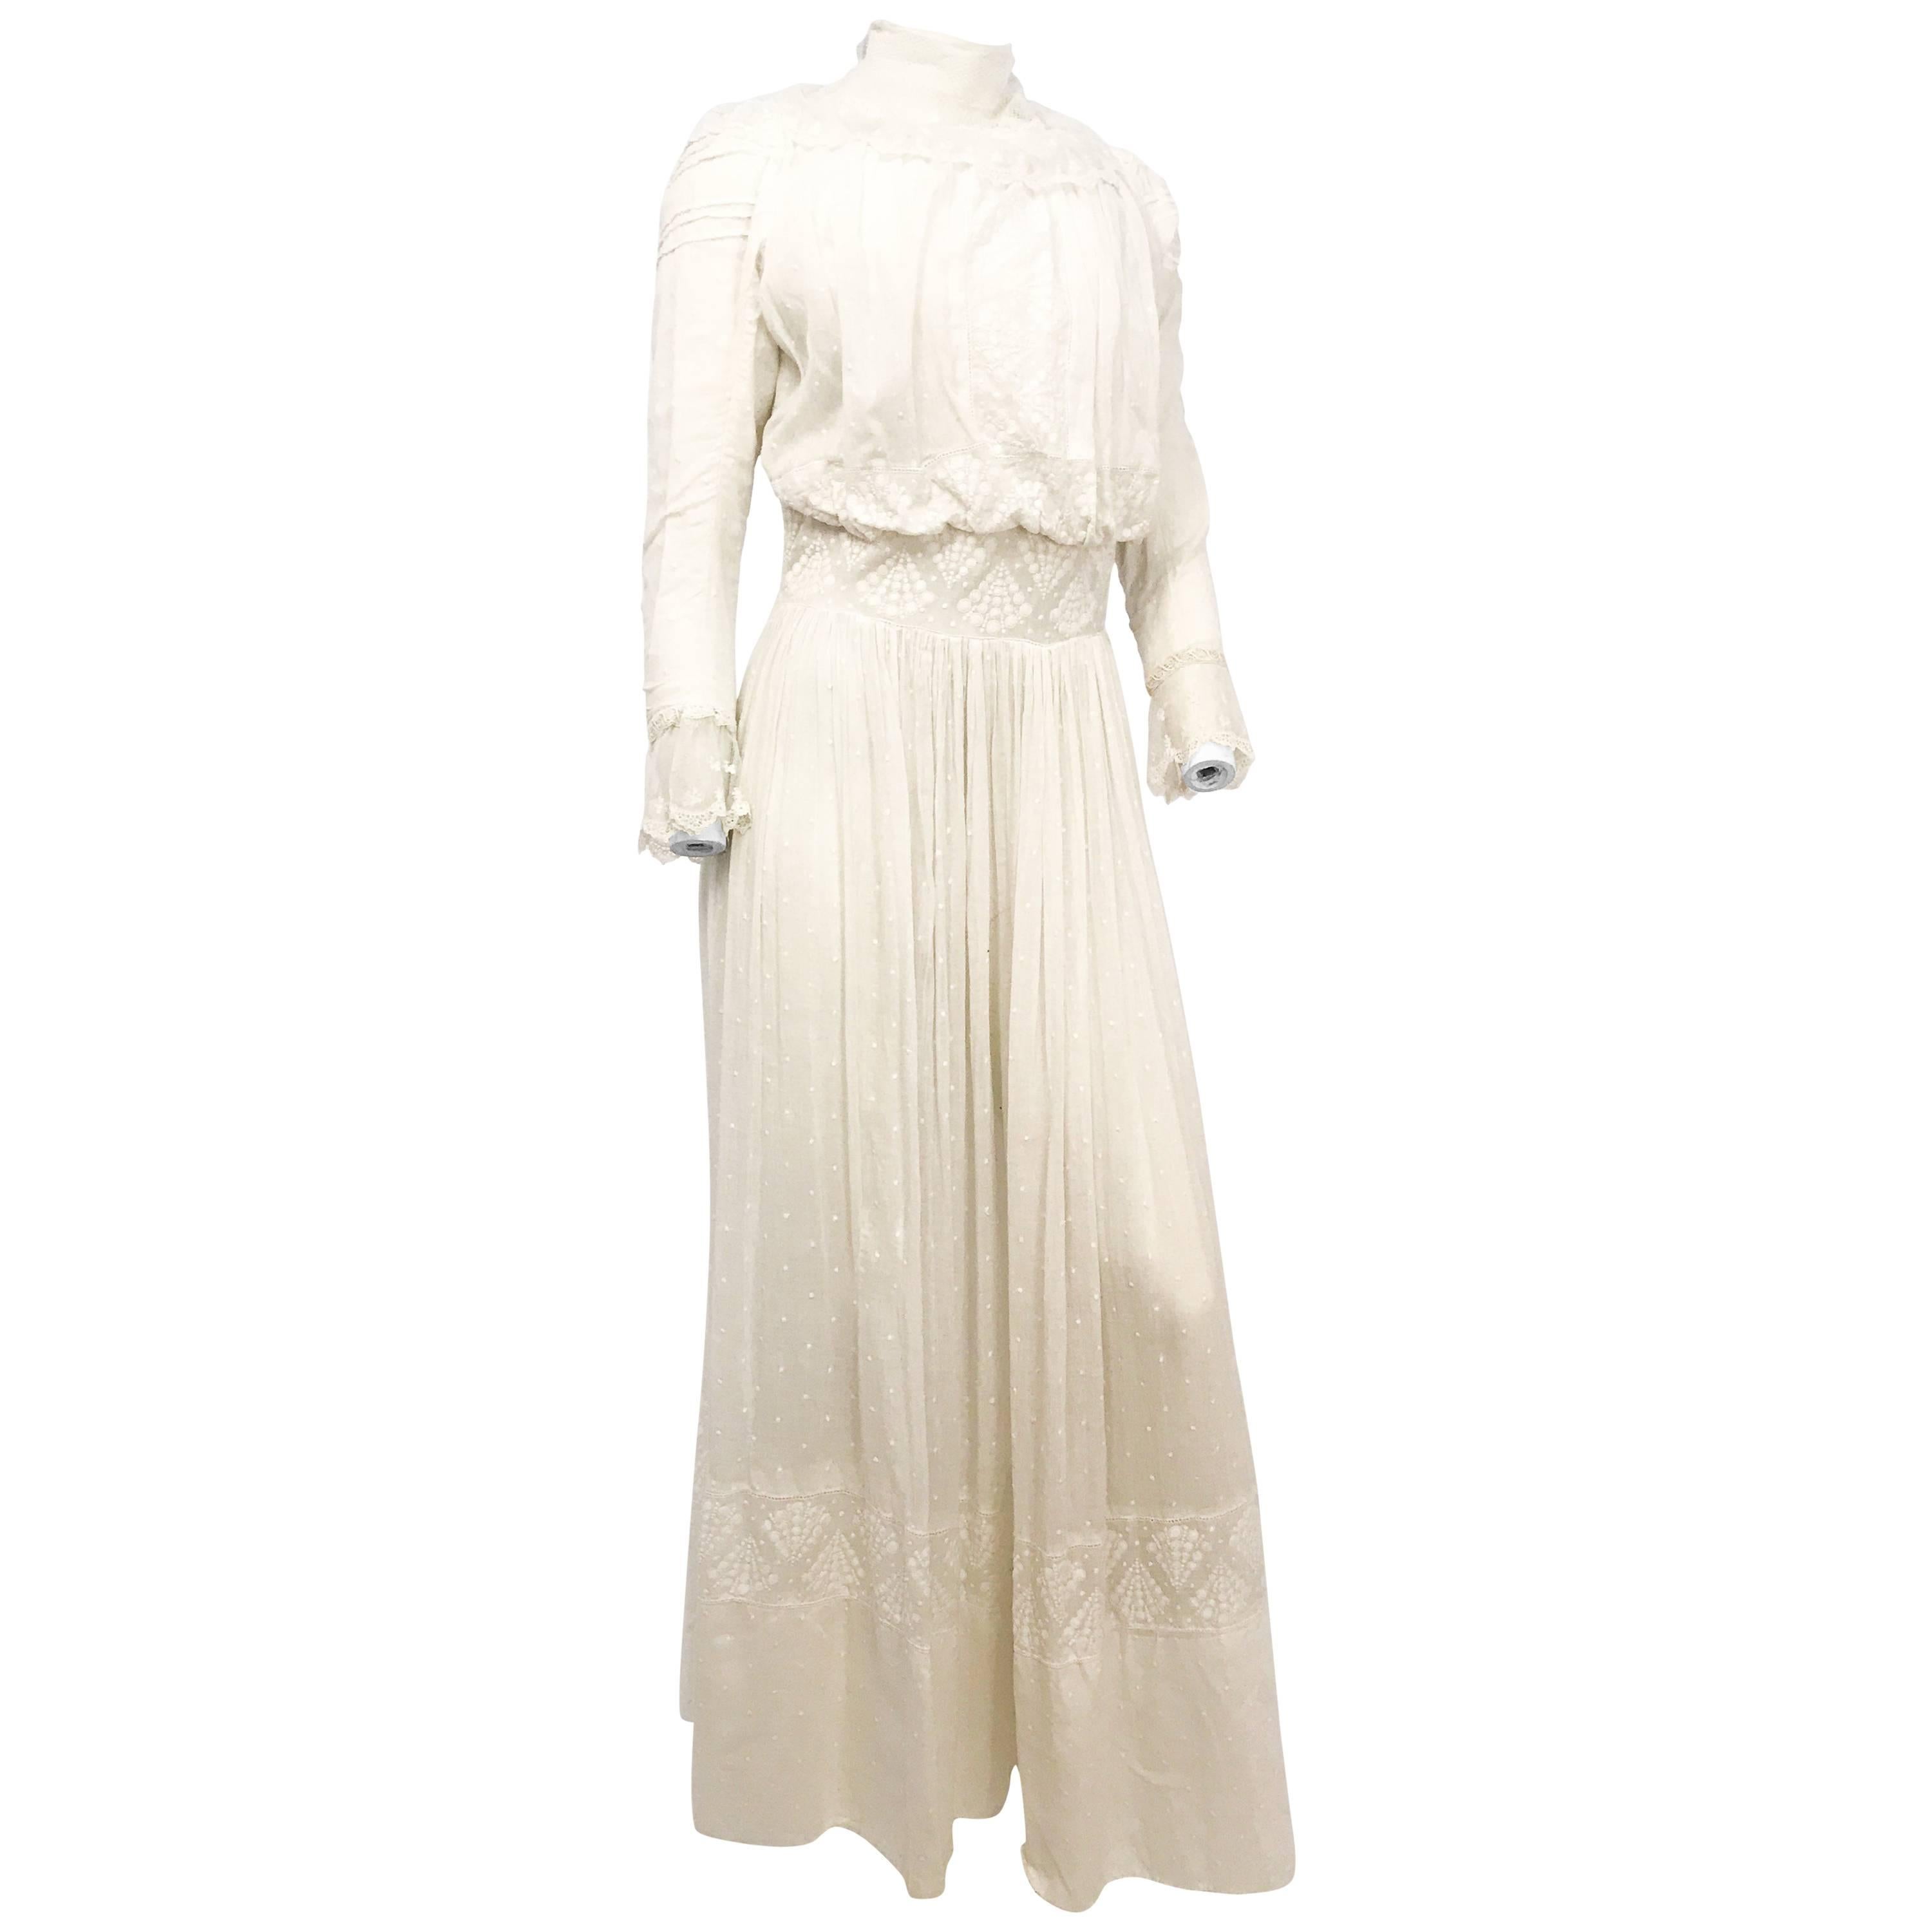 Edwardian White Wedding/Lawn Dress with Lace Details